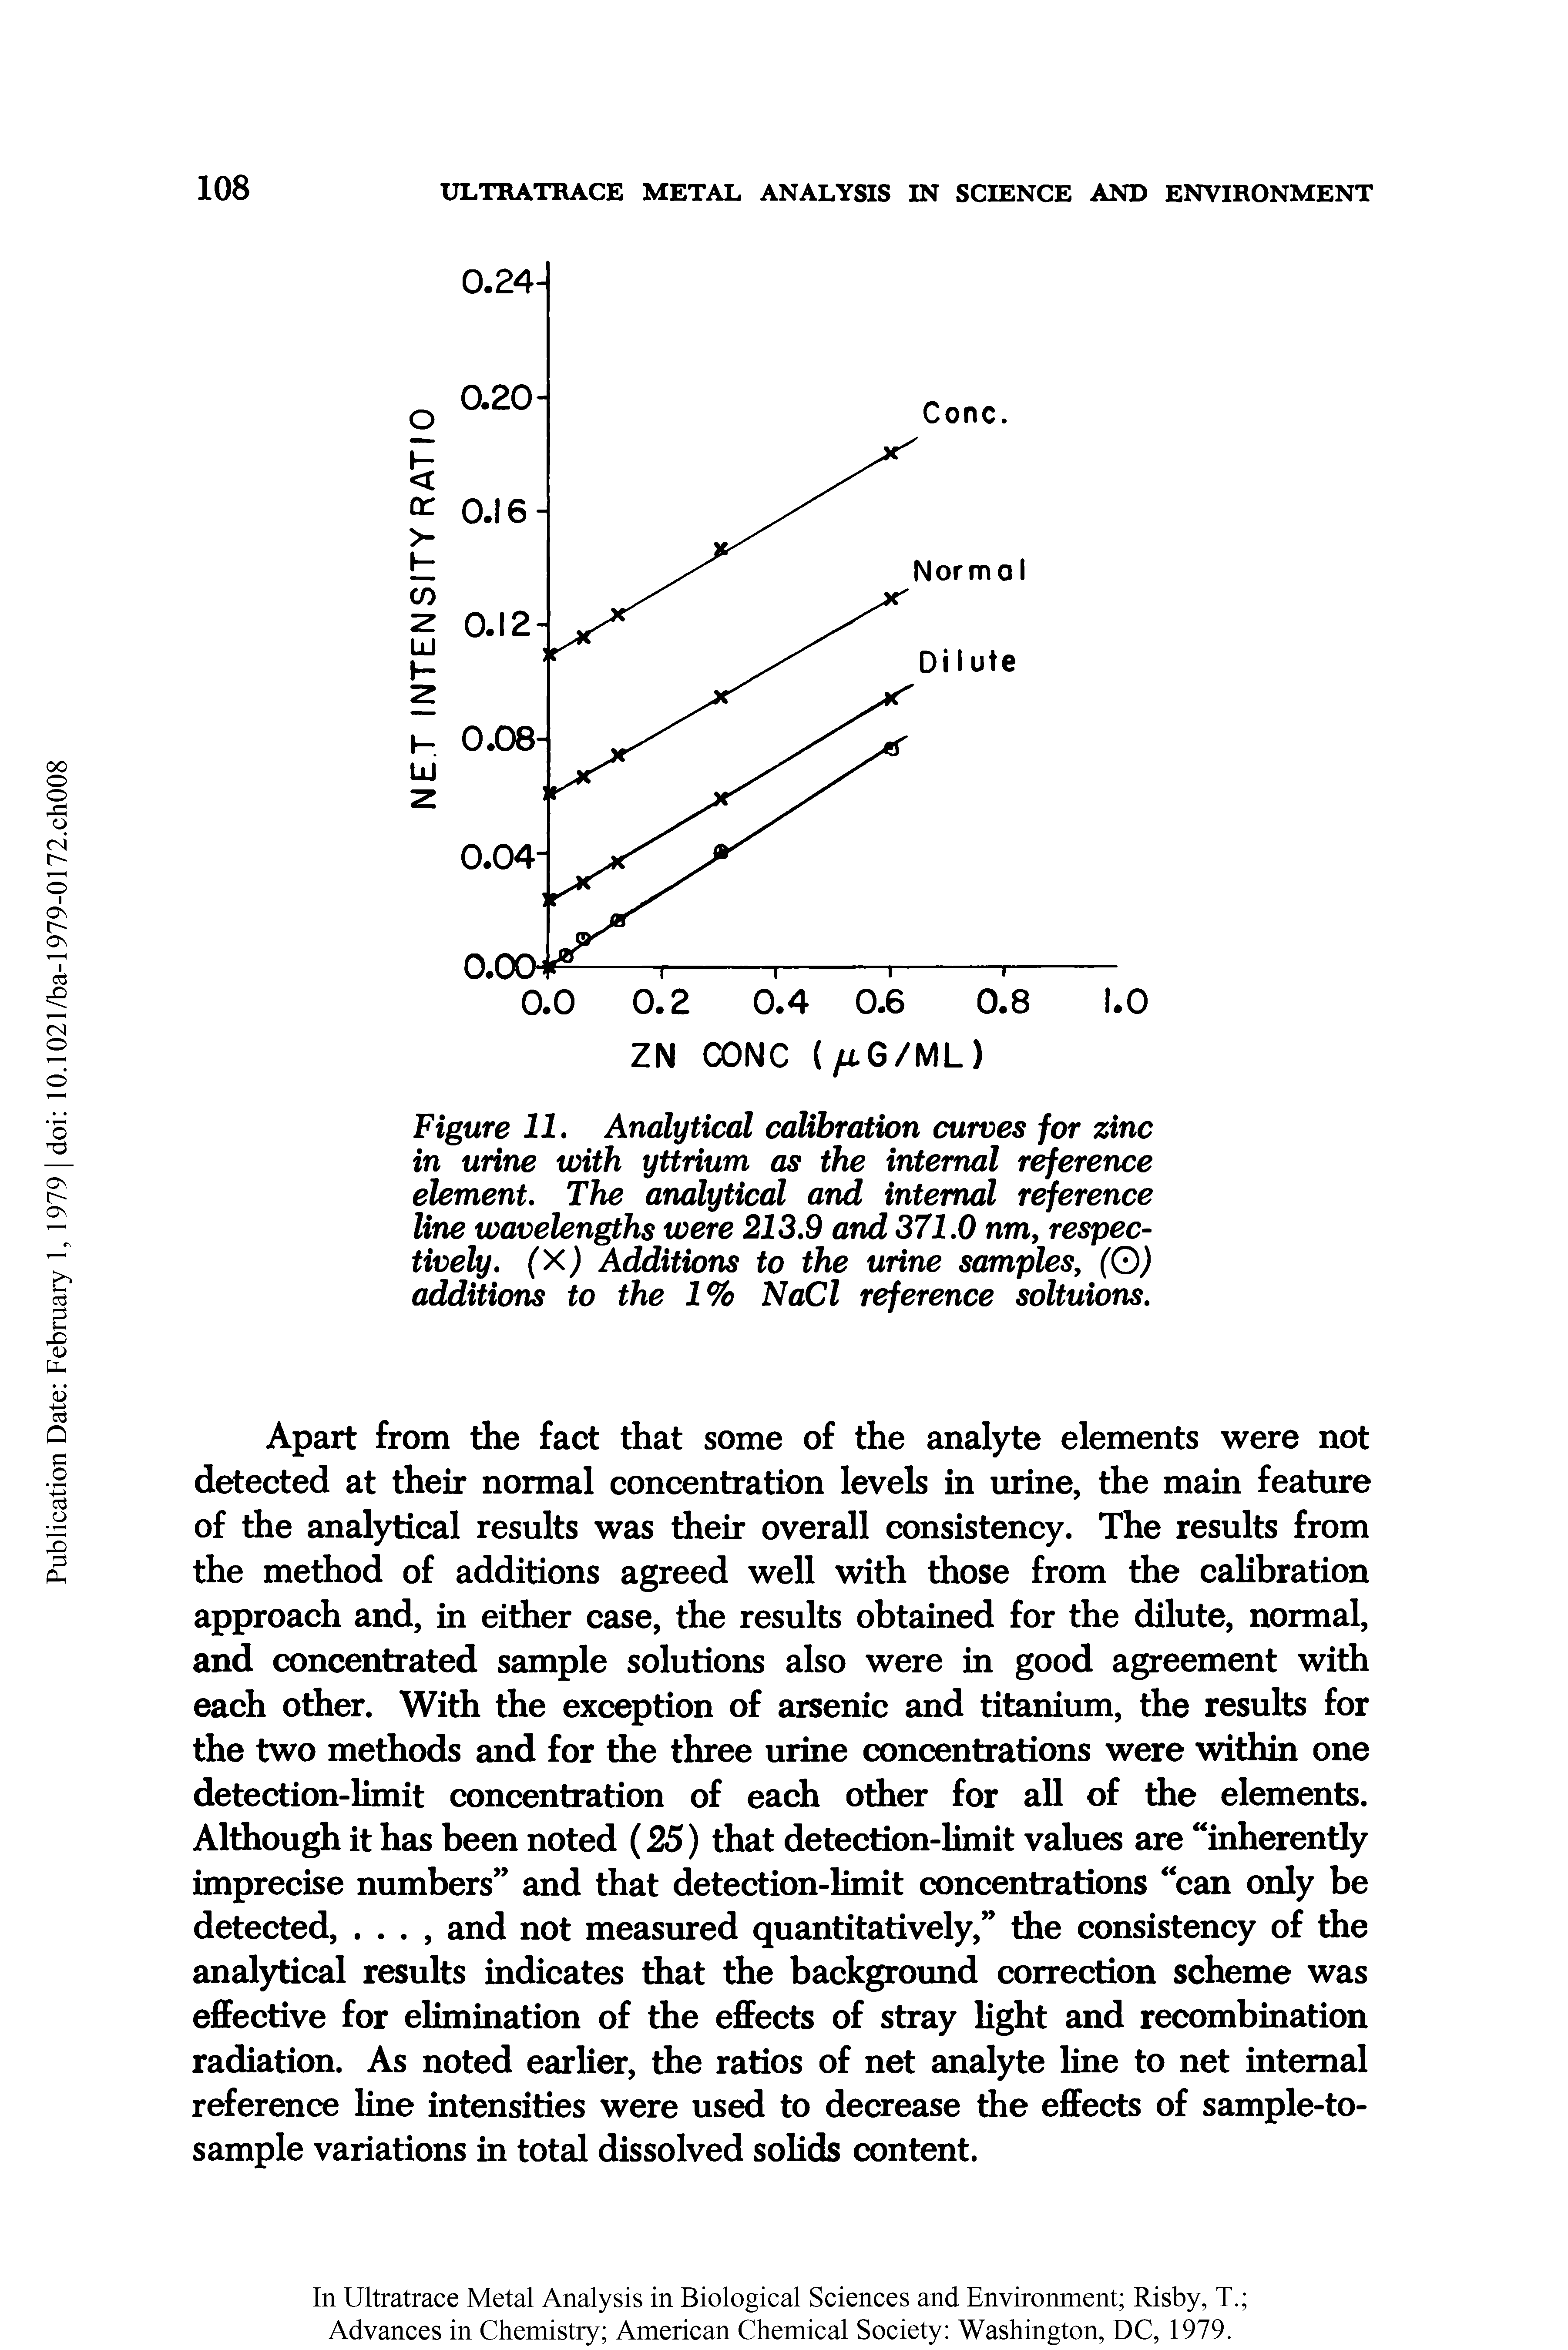 Figure 11, Analytical calibration curves for zinc in urine with yttrium as the internal reference element. The analytical and internal reference line wavelengths were 213,9 and 371.0 nm, respectively. (X) Additions to the urine samples, (O) additions to the 1% NaCl reference soltuions.